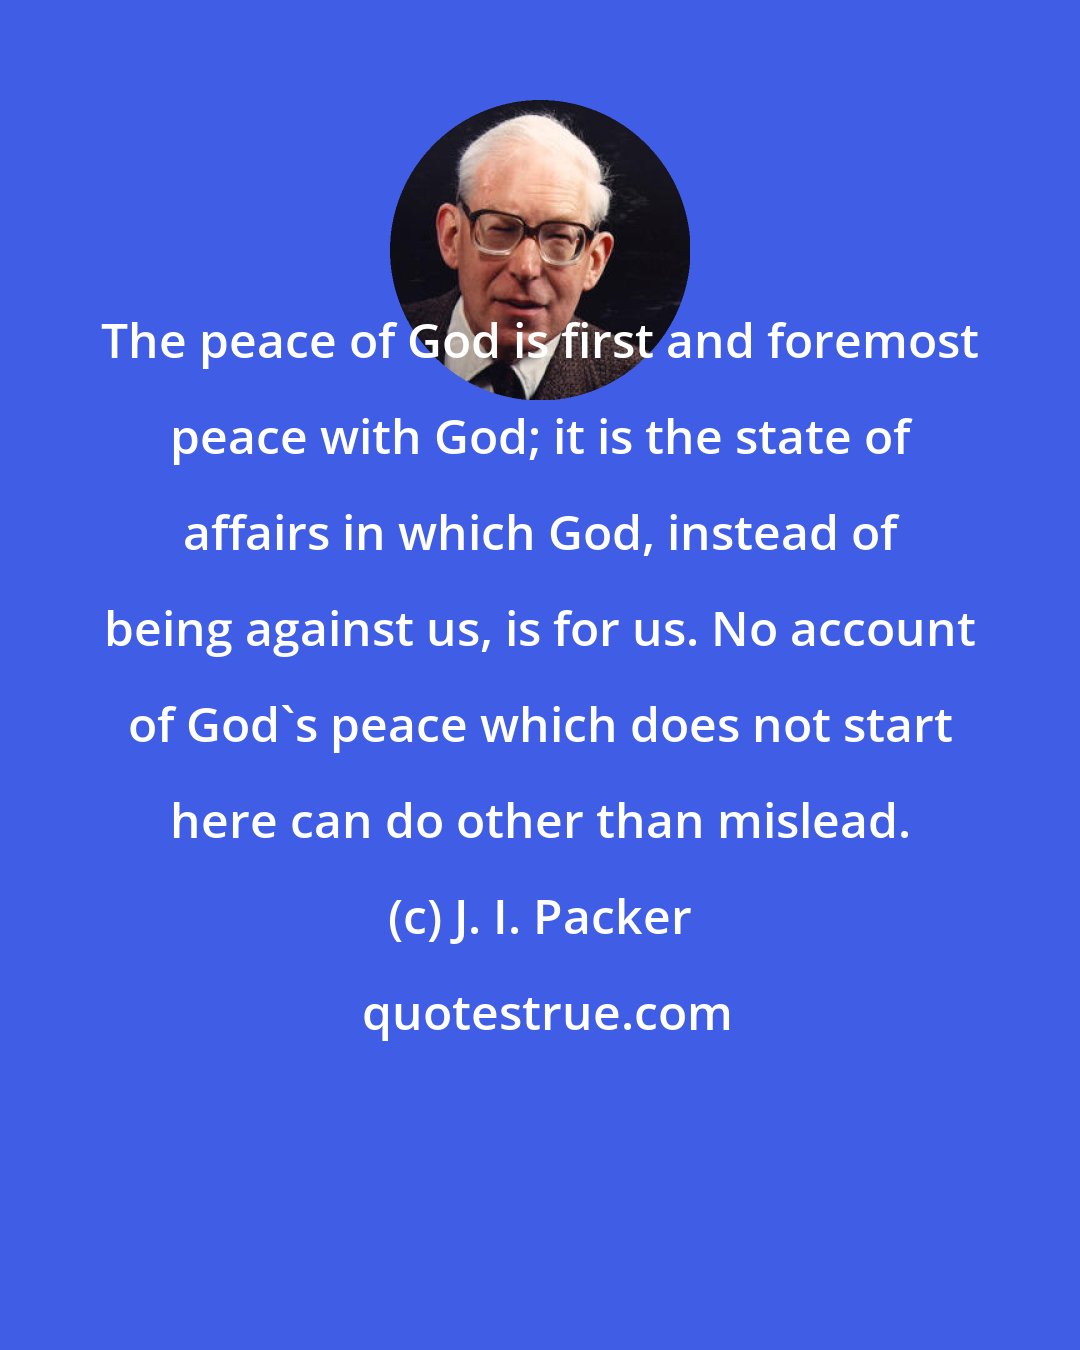 J. I. Packer: The peace of God is first and foremost peace with God; it is the state of affairs in which God, instead of being against us, is for us. No account of God's peace which does not start here can do other than mislead.